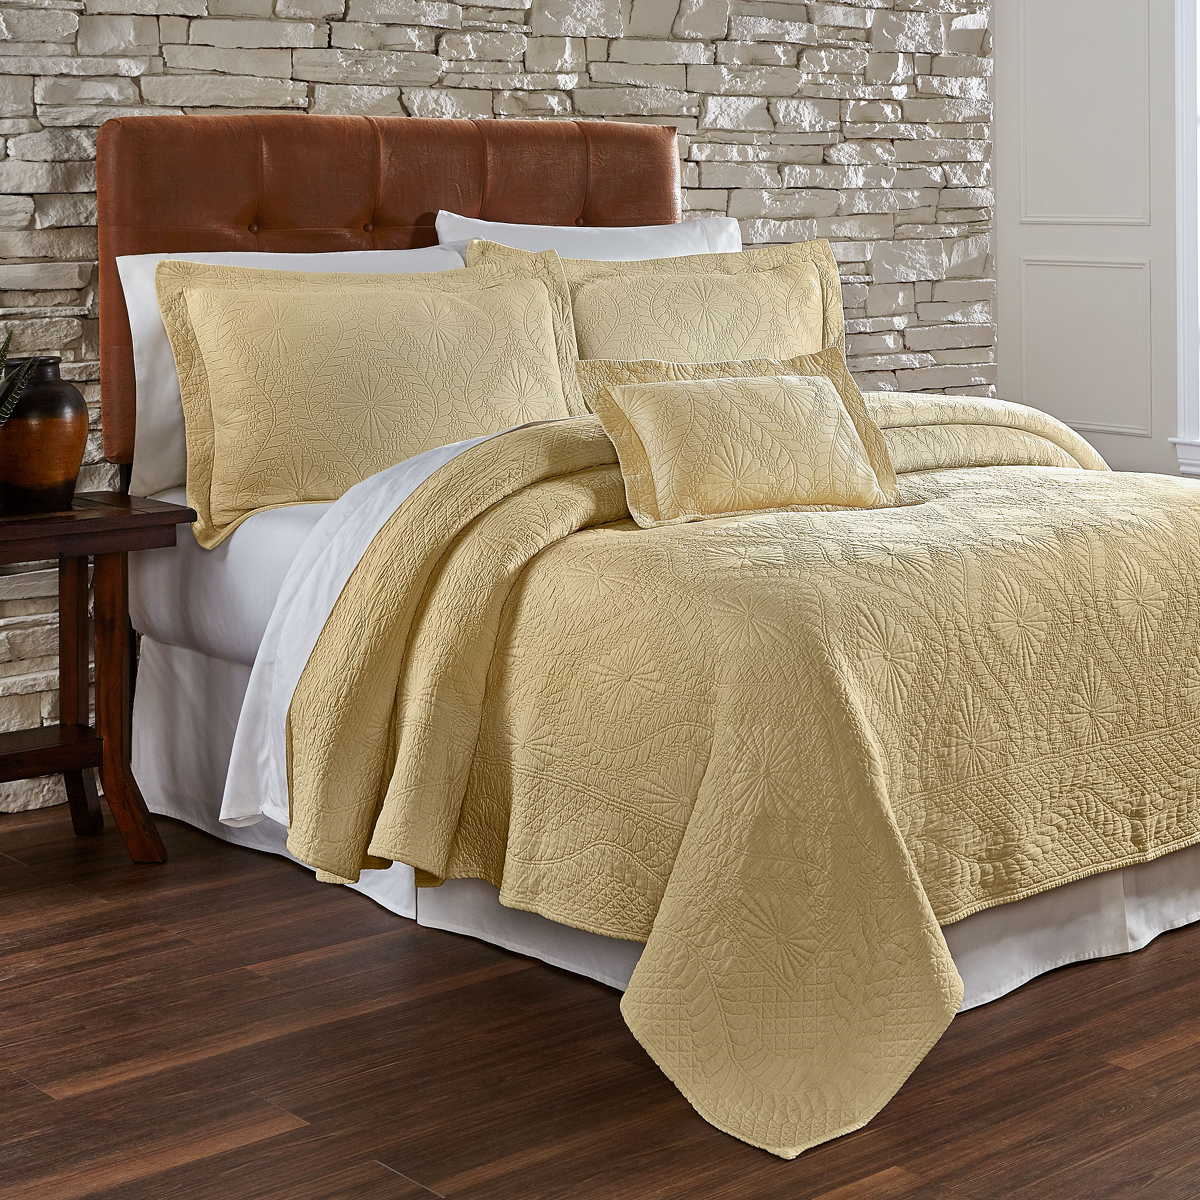 Traditions Linens Bedding Suzi Matelasse Coverlet and Shams